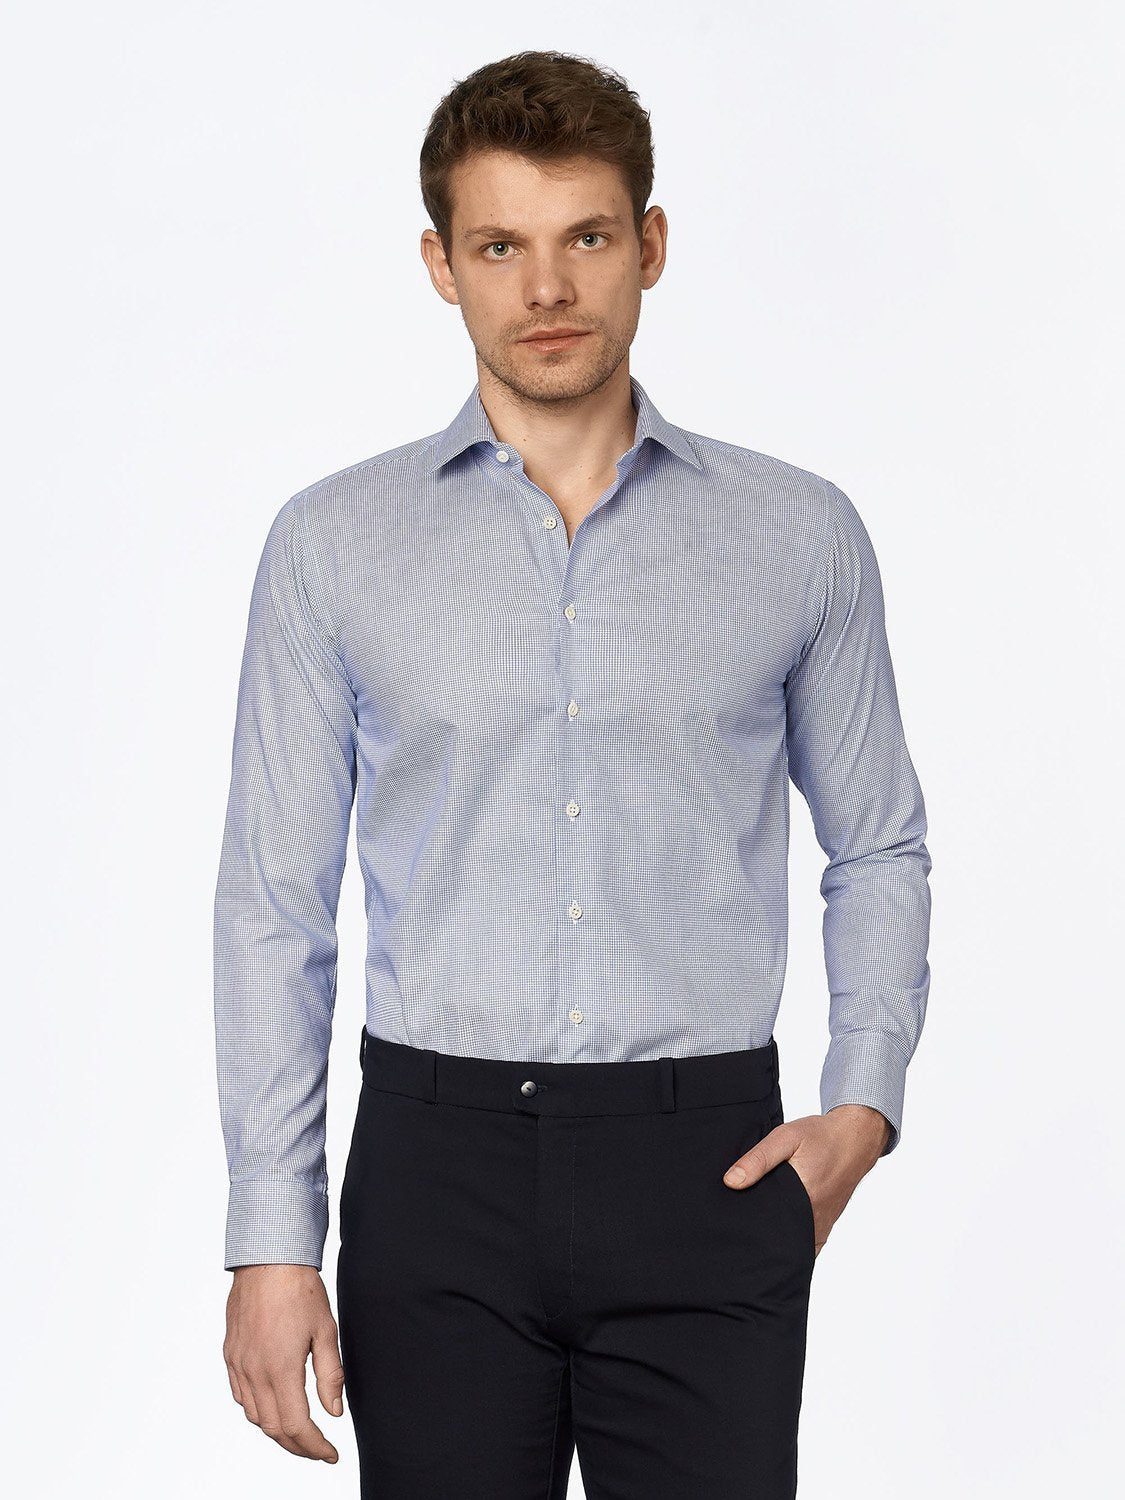 Sustainable Dress Shirt from Organic Cotton Check Blue - CARPASUS Online  Store